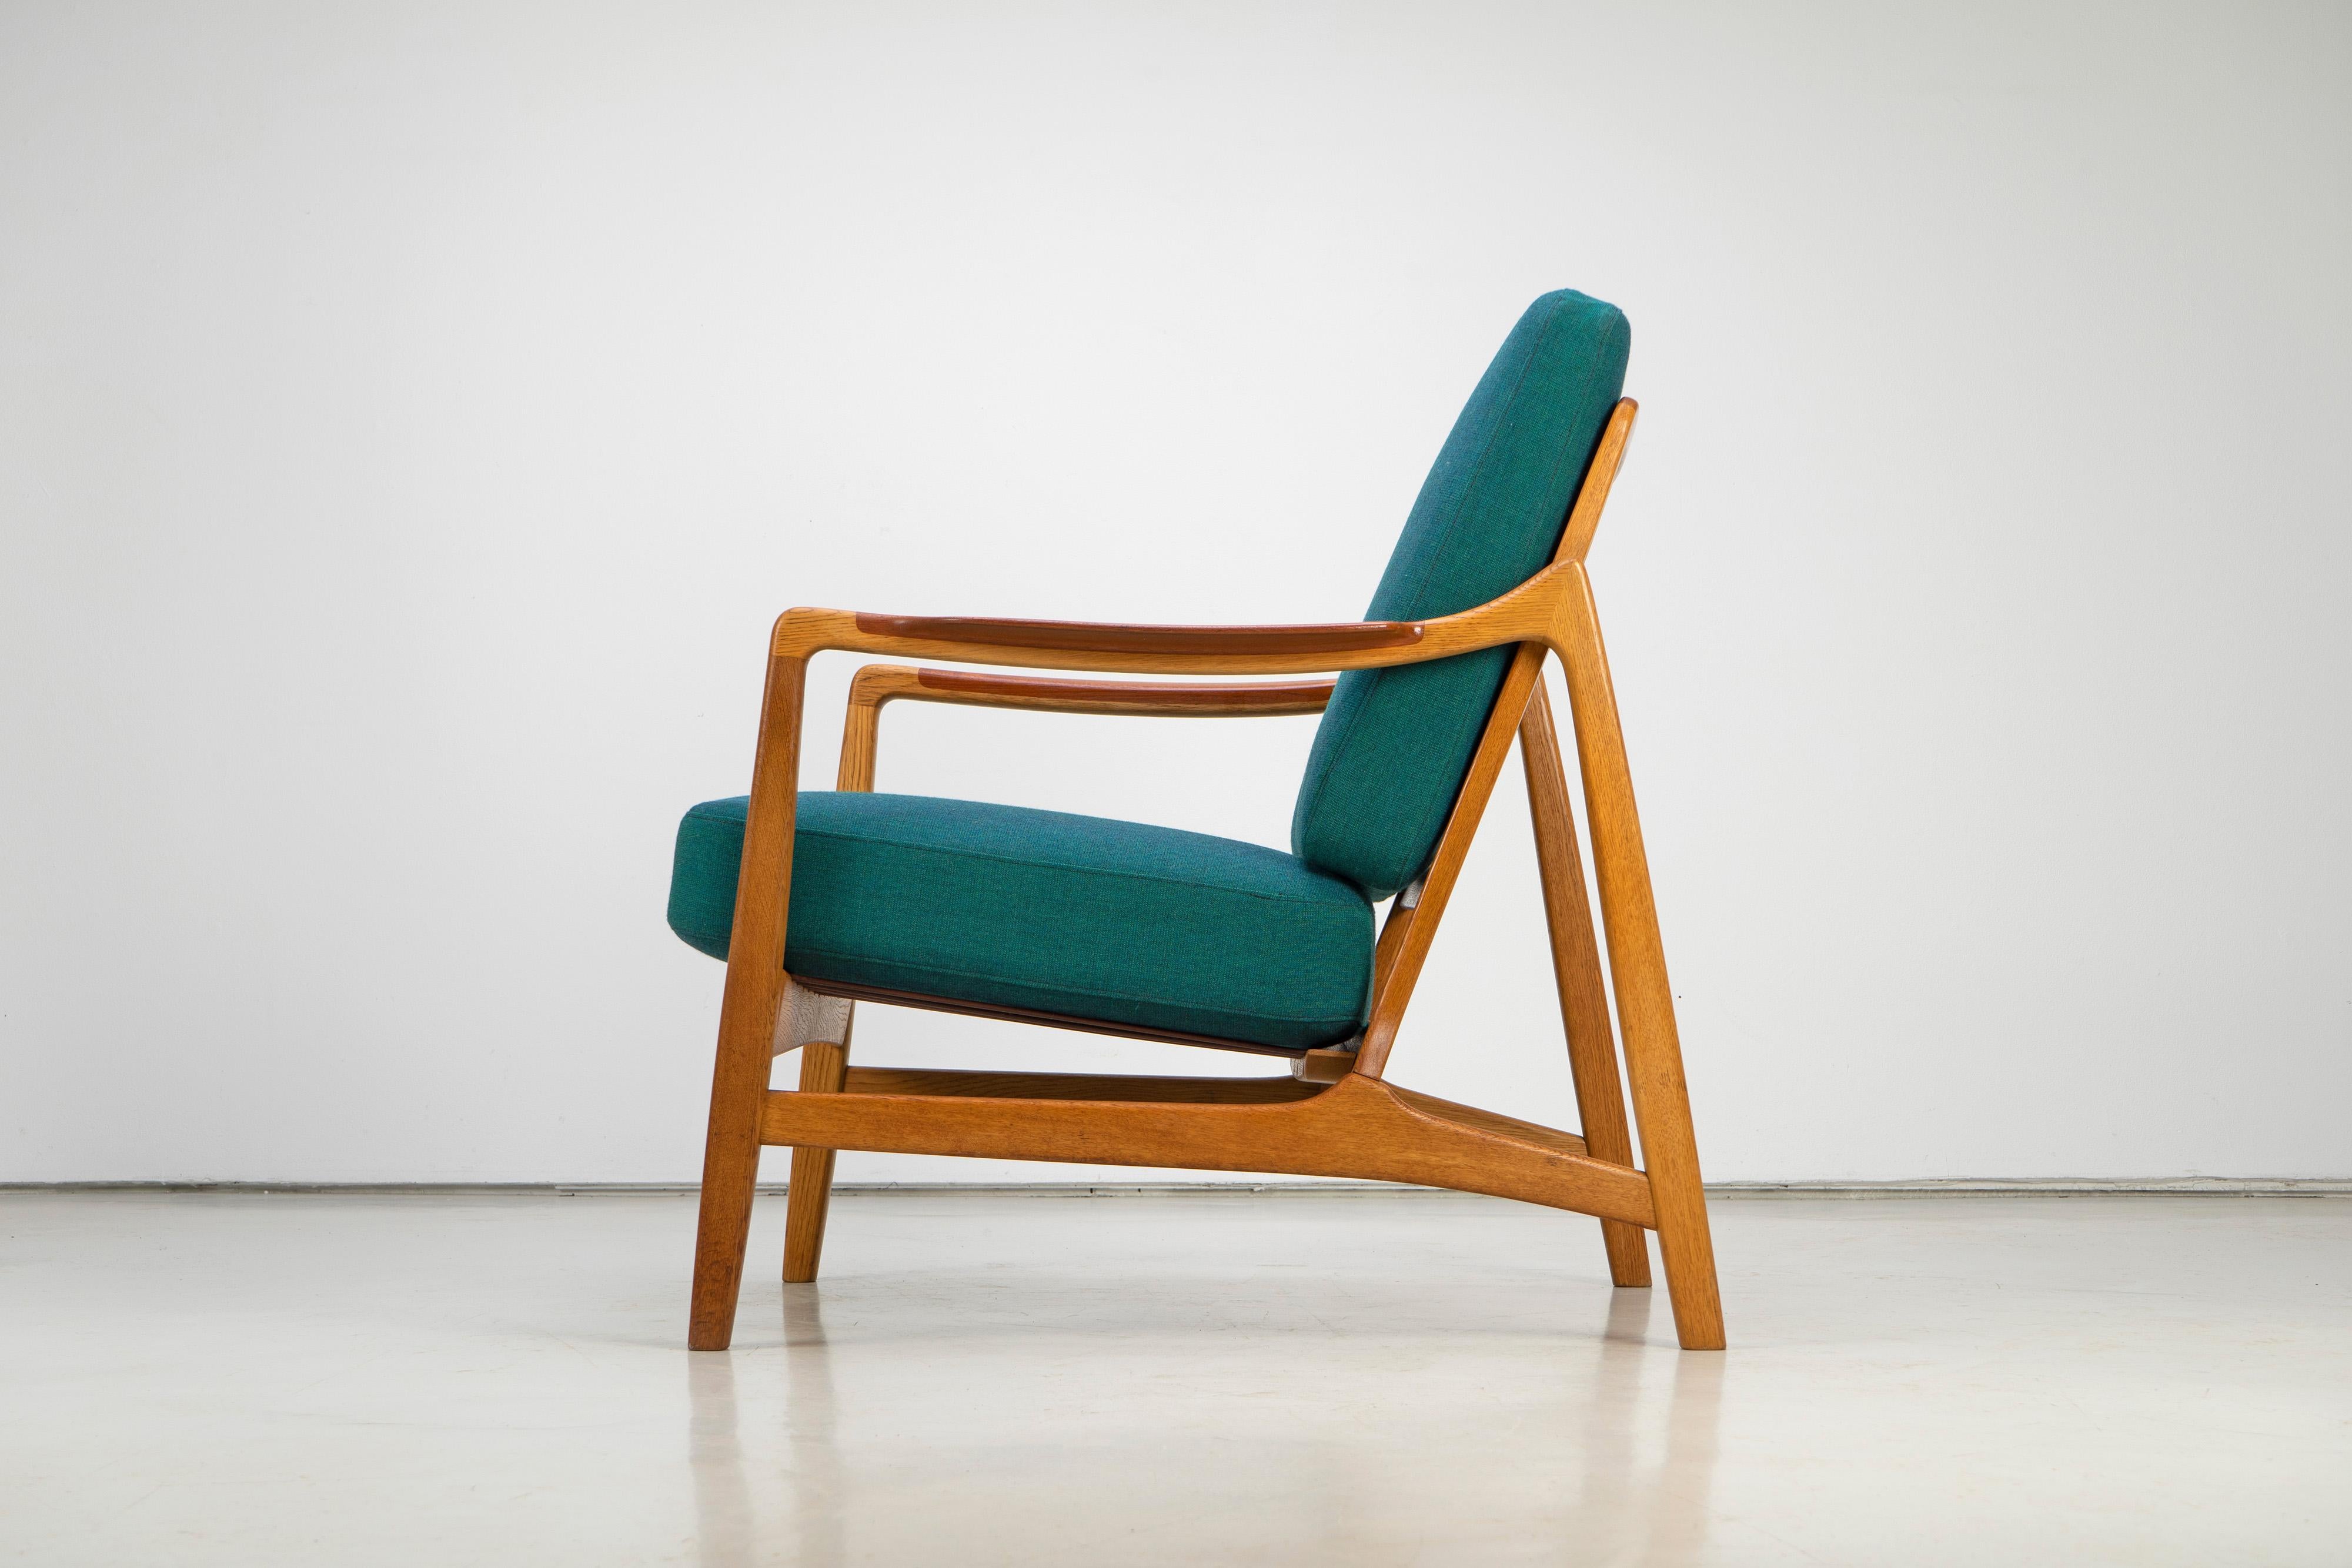 20th Century Danish Modern Lounge Chair by Tove & Edvard Kindt-Larsen, Teak and Oak, 1960s For Sale